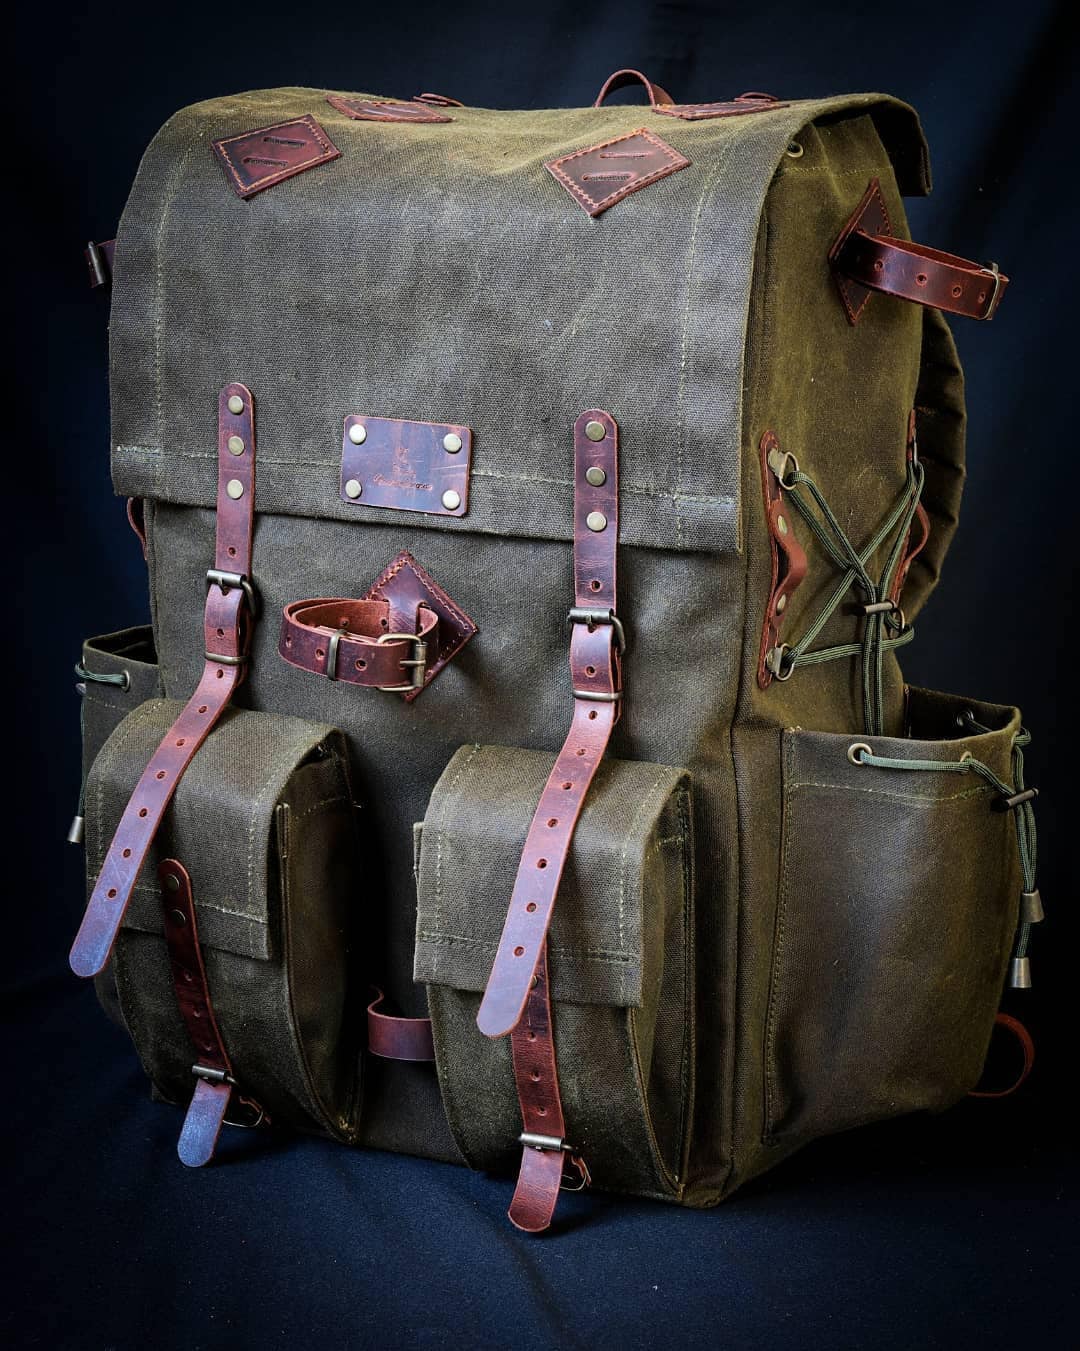 80 L | Bushcraft Backpack | Camping Backack | Green, Brown, Dhaki Colours | Handmade Leather, Canvas Backpack for Travel, Camping, Bushcraft  99percenthandmade   